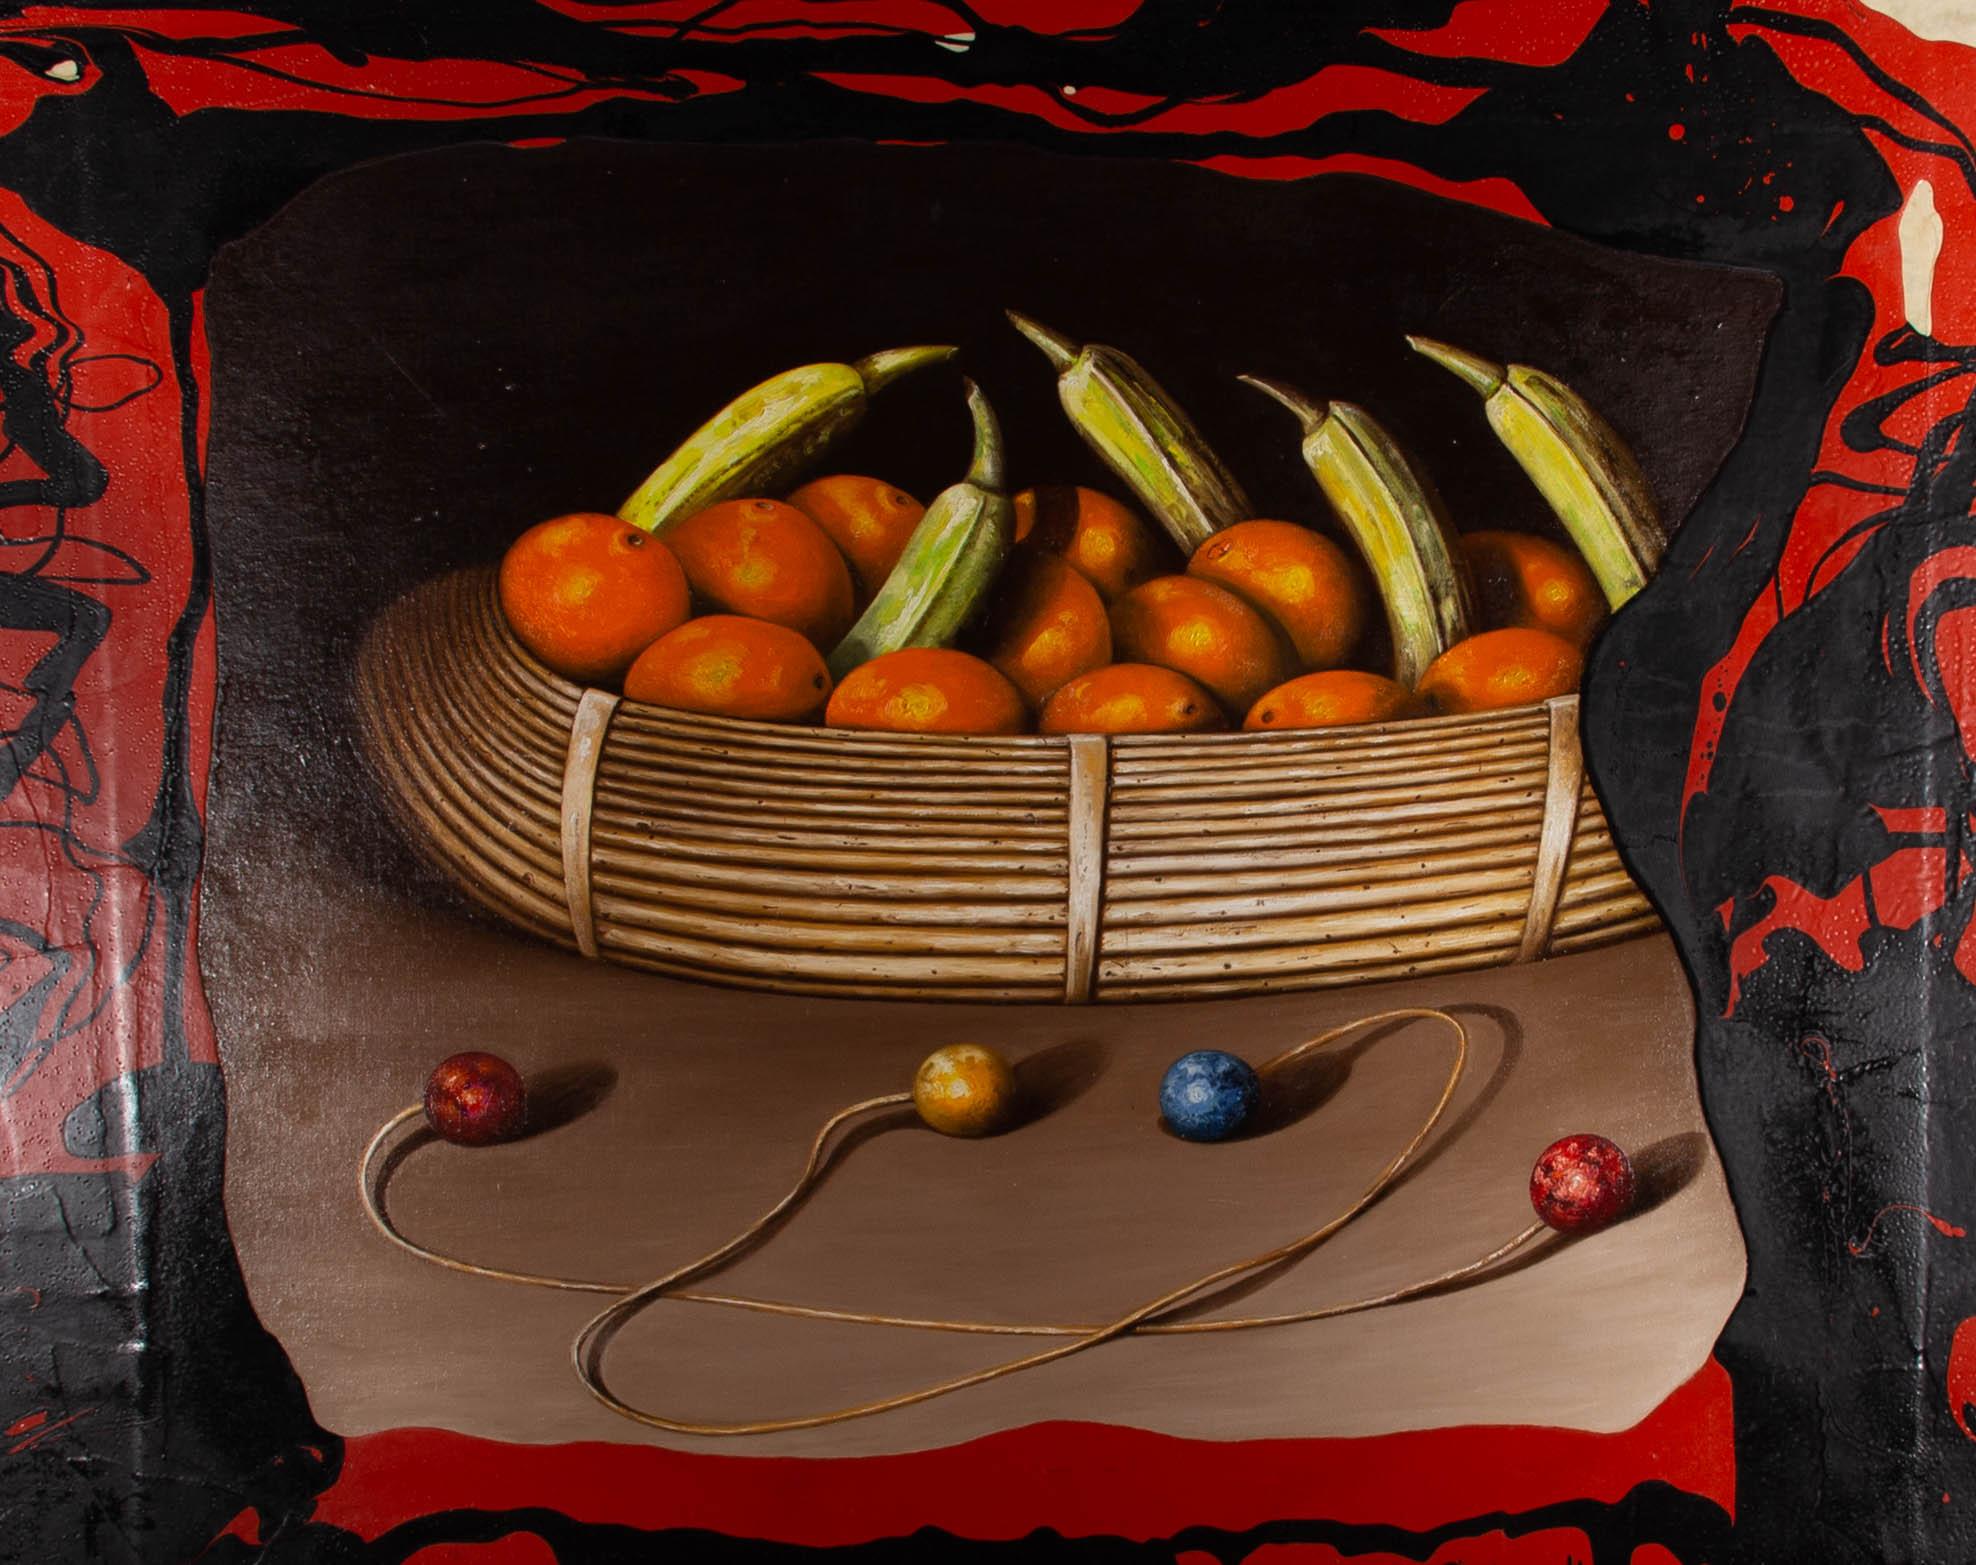 An incredibly striking and vibrant surrealist still life, showing a basket full of phallic plantain and oranges. In front of the basket are strange objects made of string and coloured balls. The artist shows an truly skilled hand with the execution